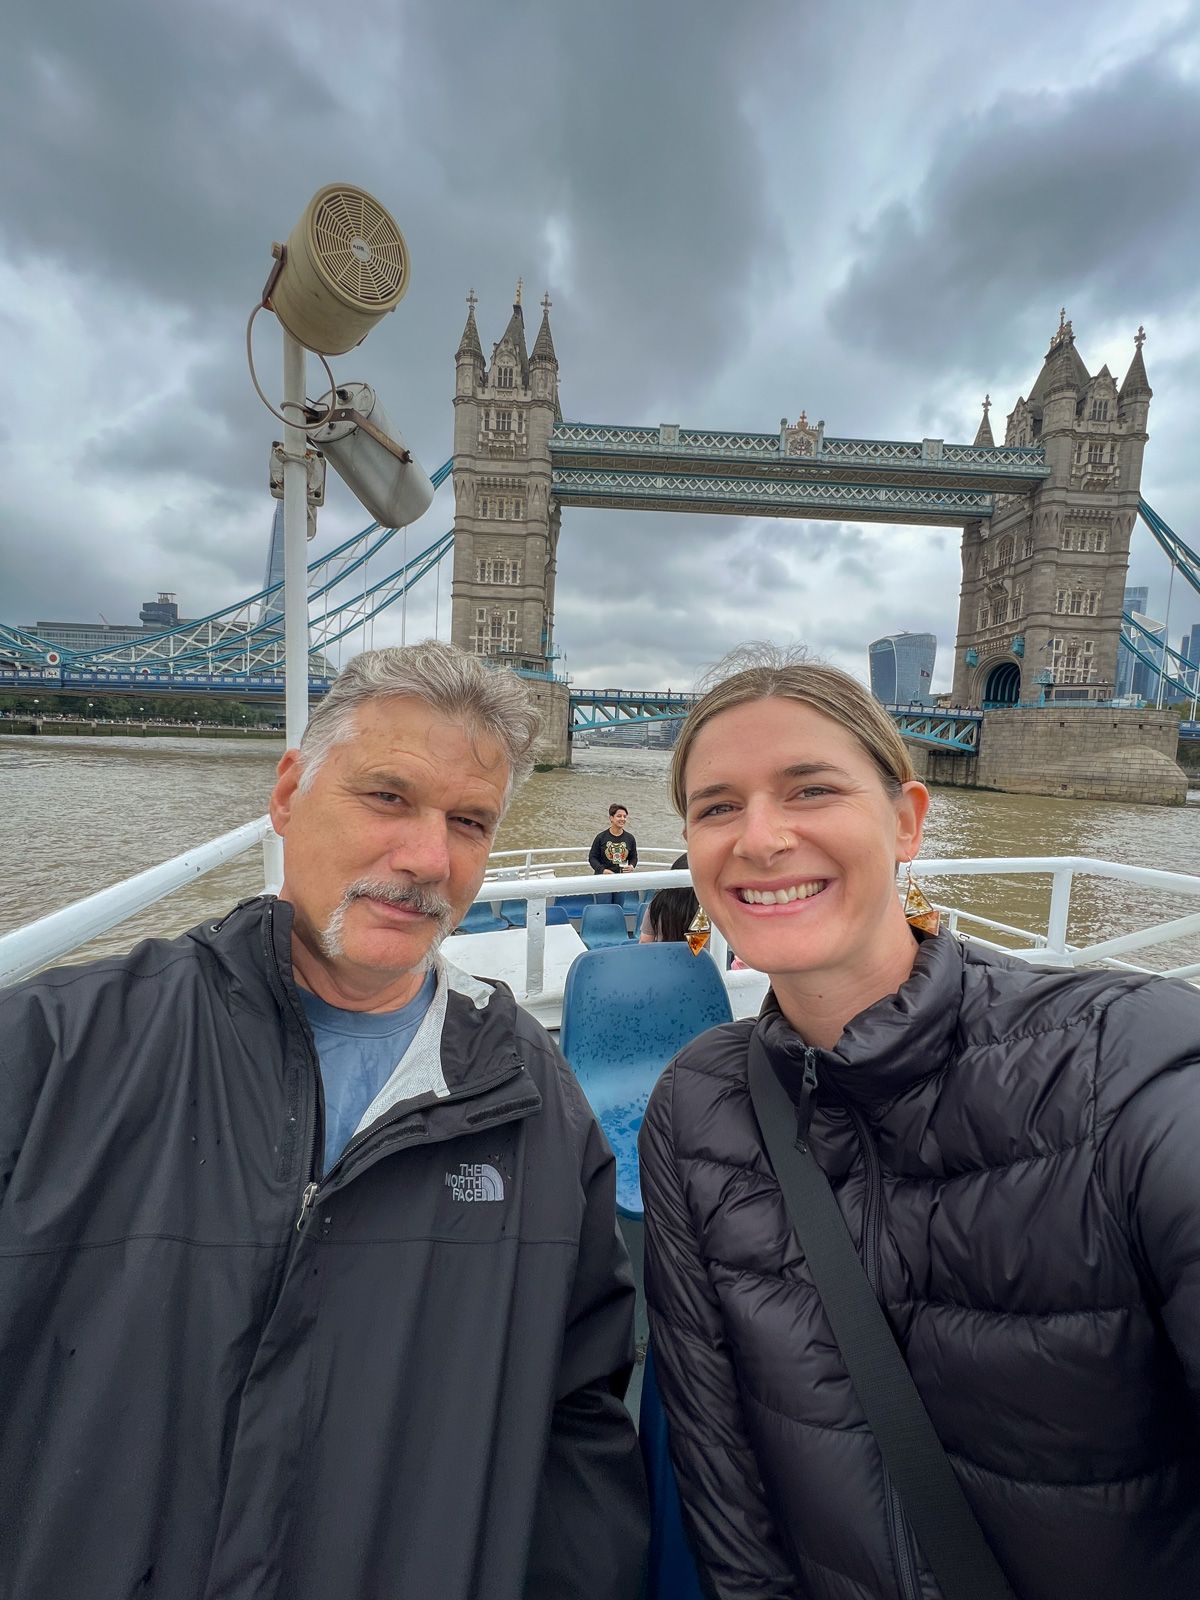 An older man in a black jacket poses next to a young woman in a black Lightweight Down Puffer Jacket from the deck of a boat in front of the London Bridge on a overcast day.